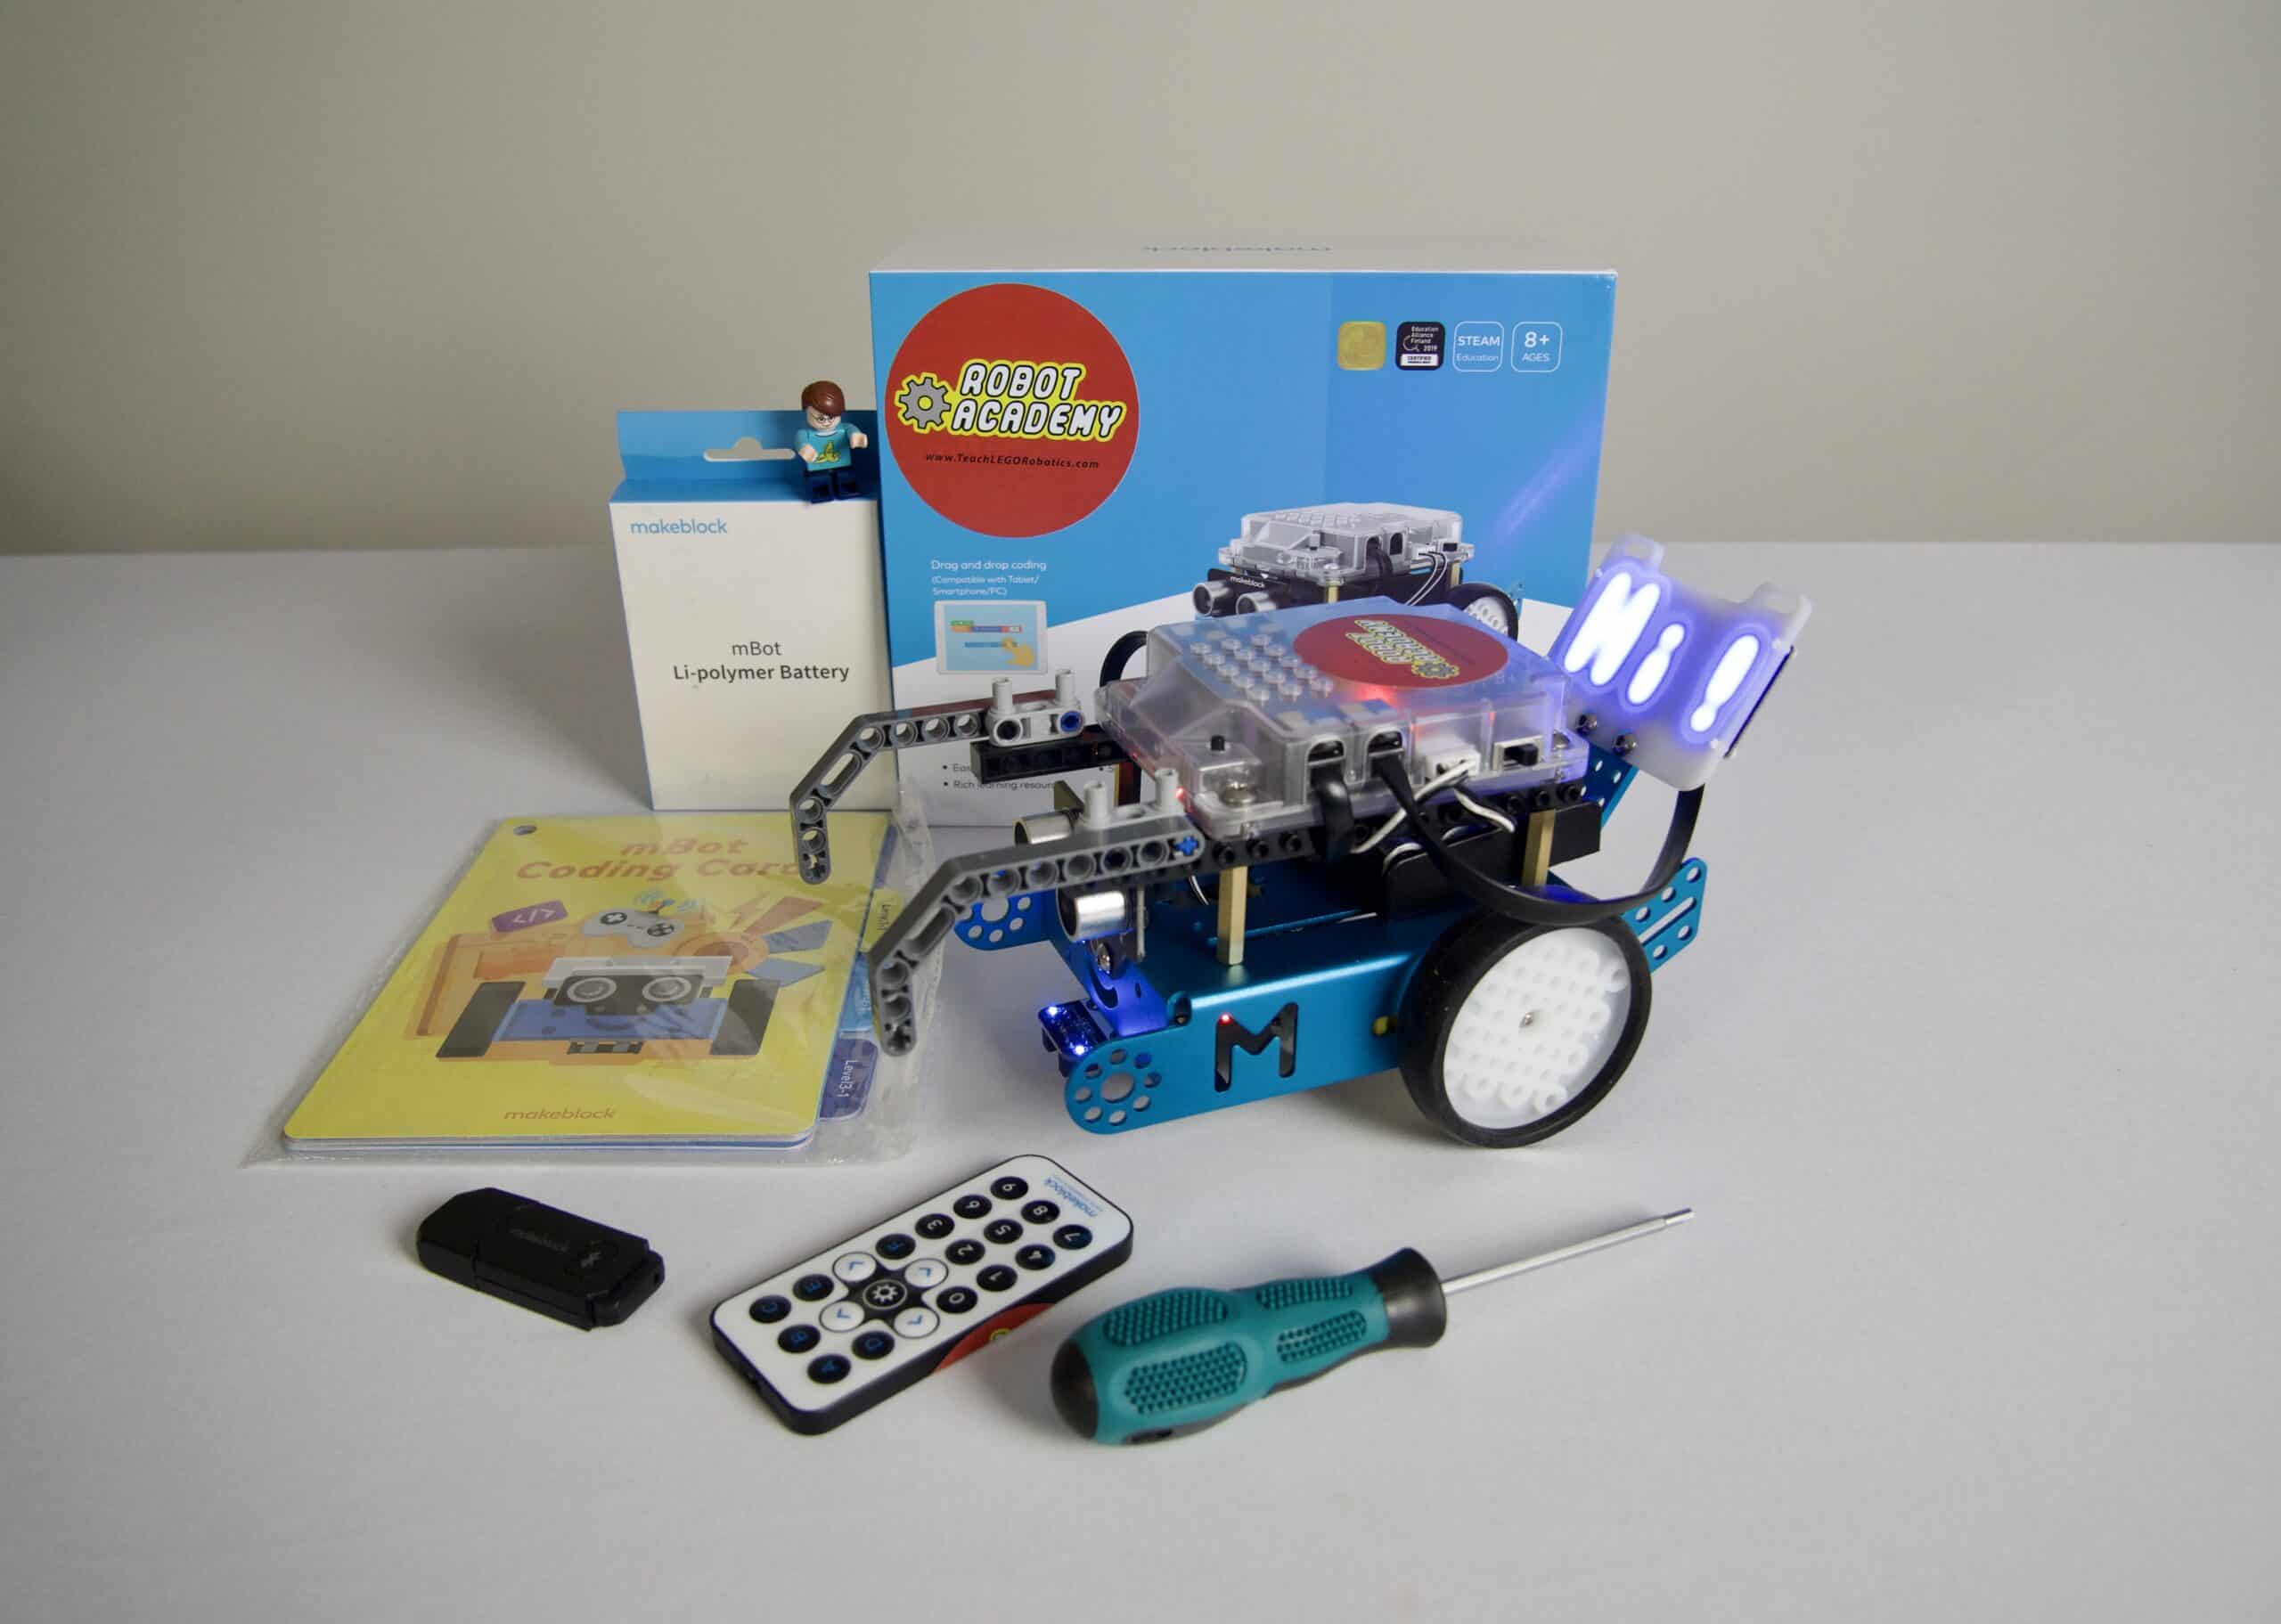 CYBER MONDAY BUNDLE: Robot Academy Arduino LEGO® Robot Deluxe Holiday Bundle with Instructional Video